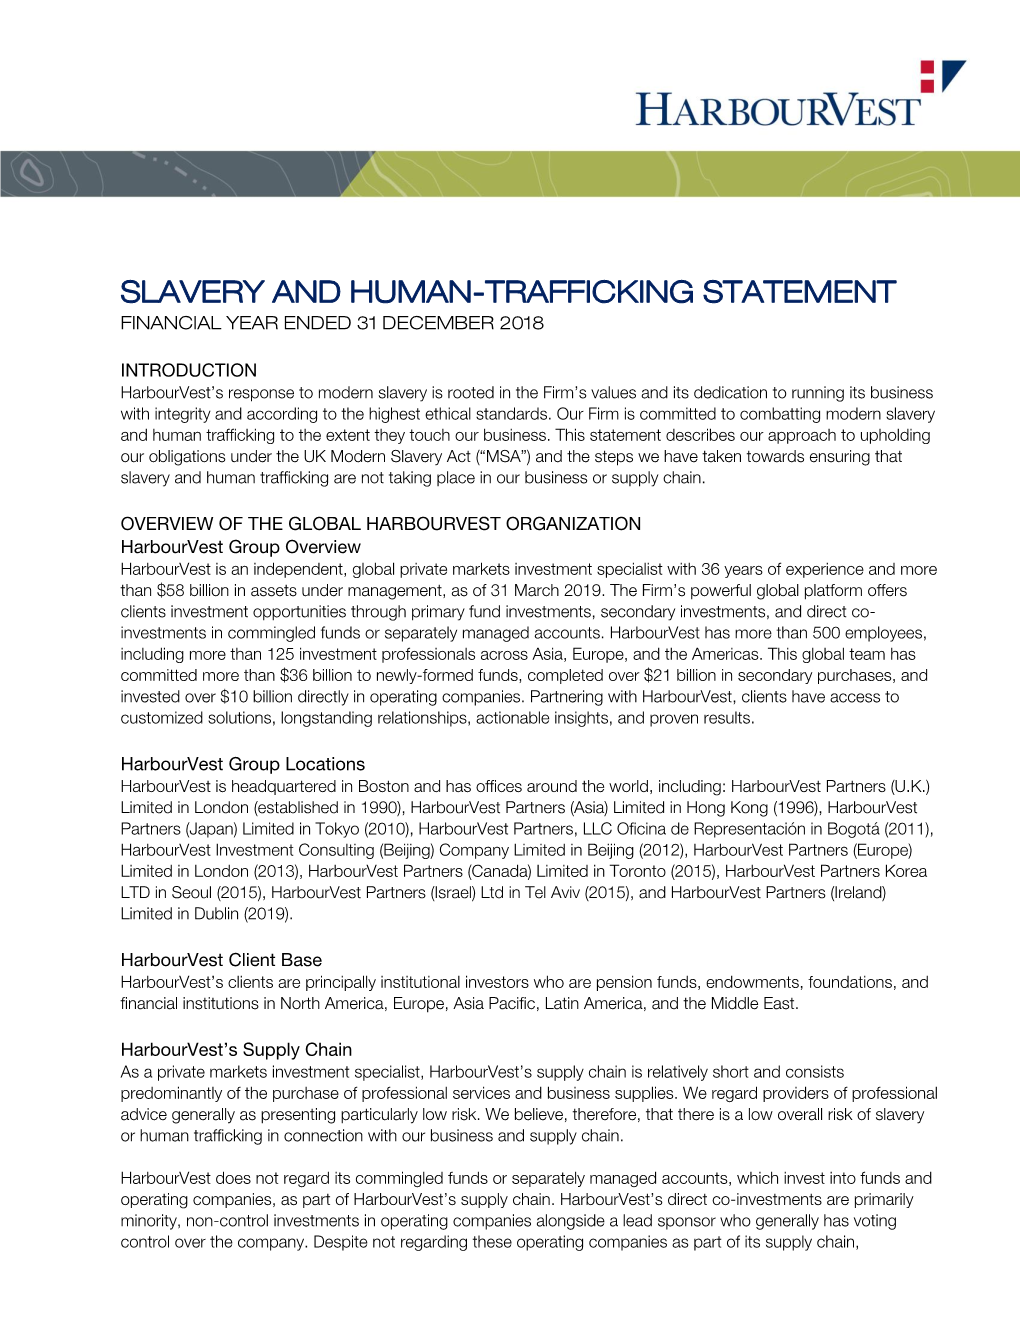 Slavery and Human-Trafficking Statement Financial Year Ended 31 December 2018